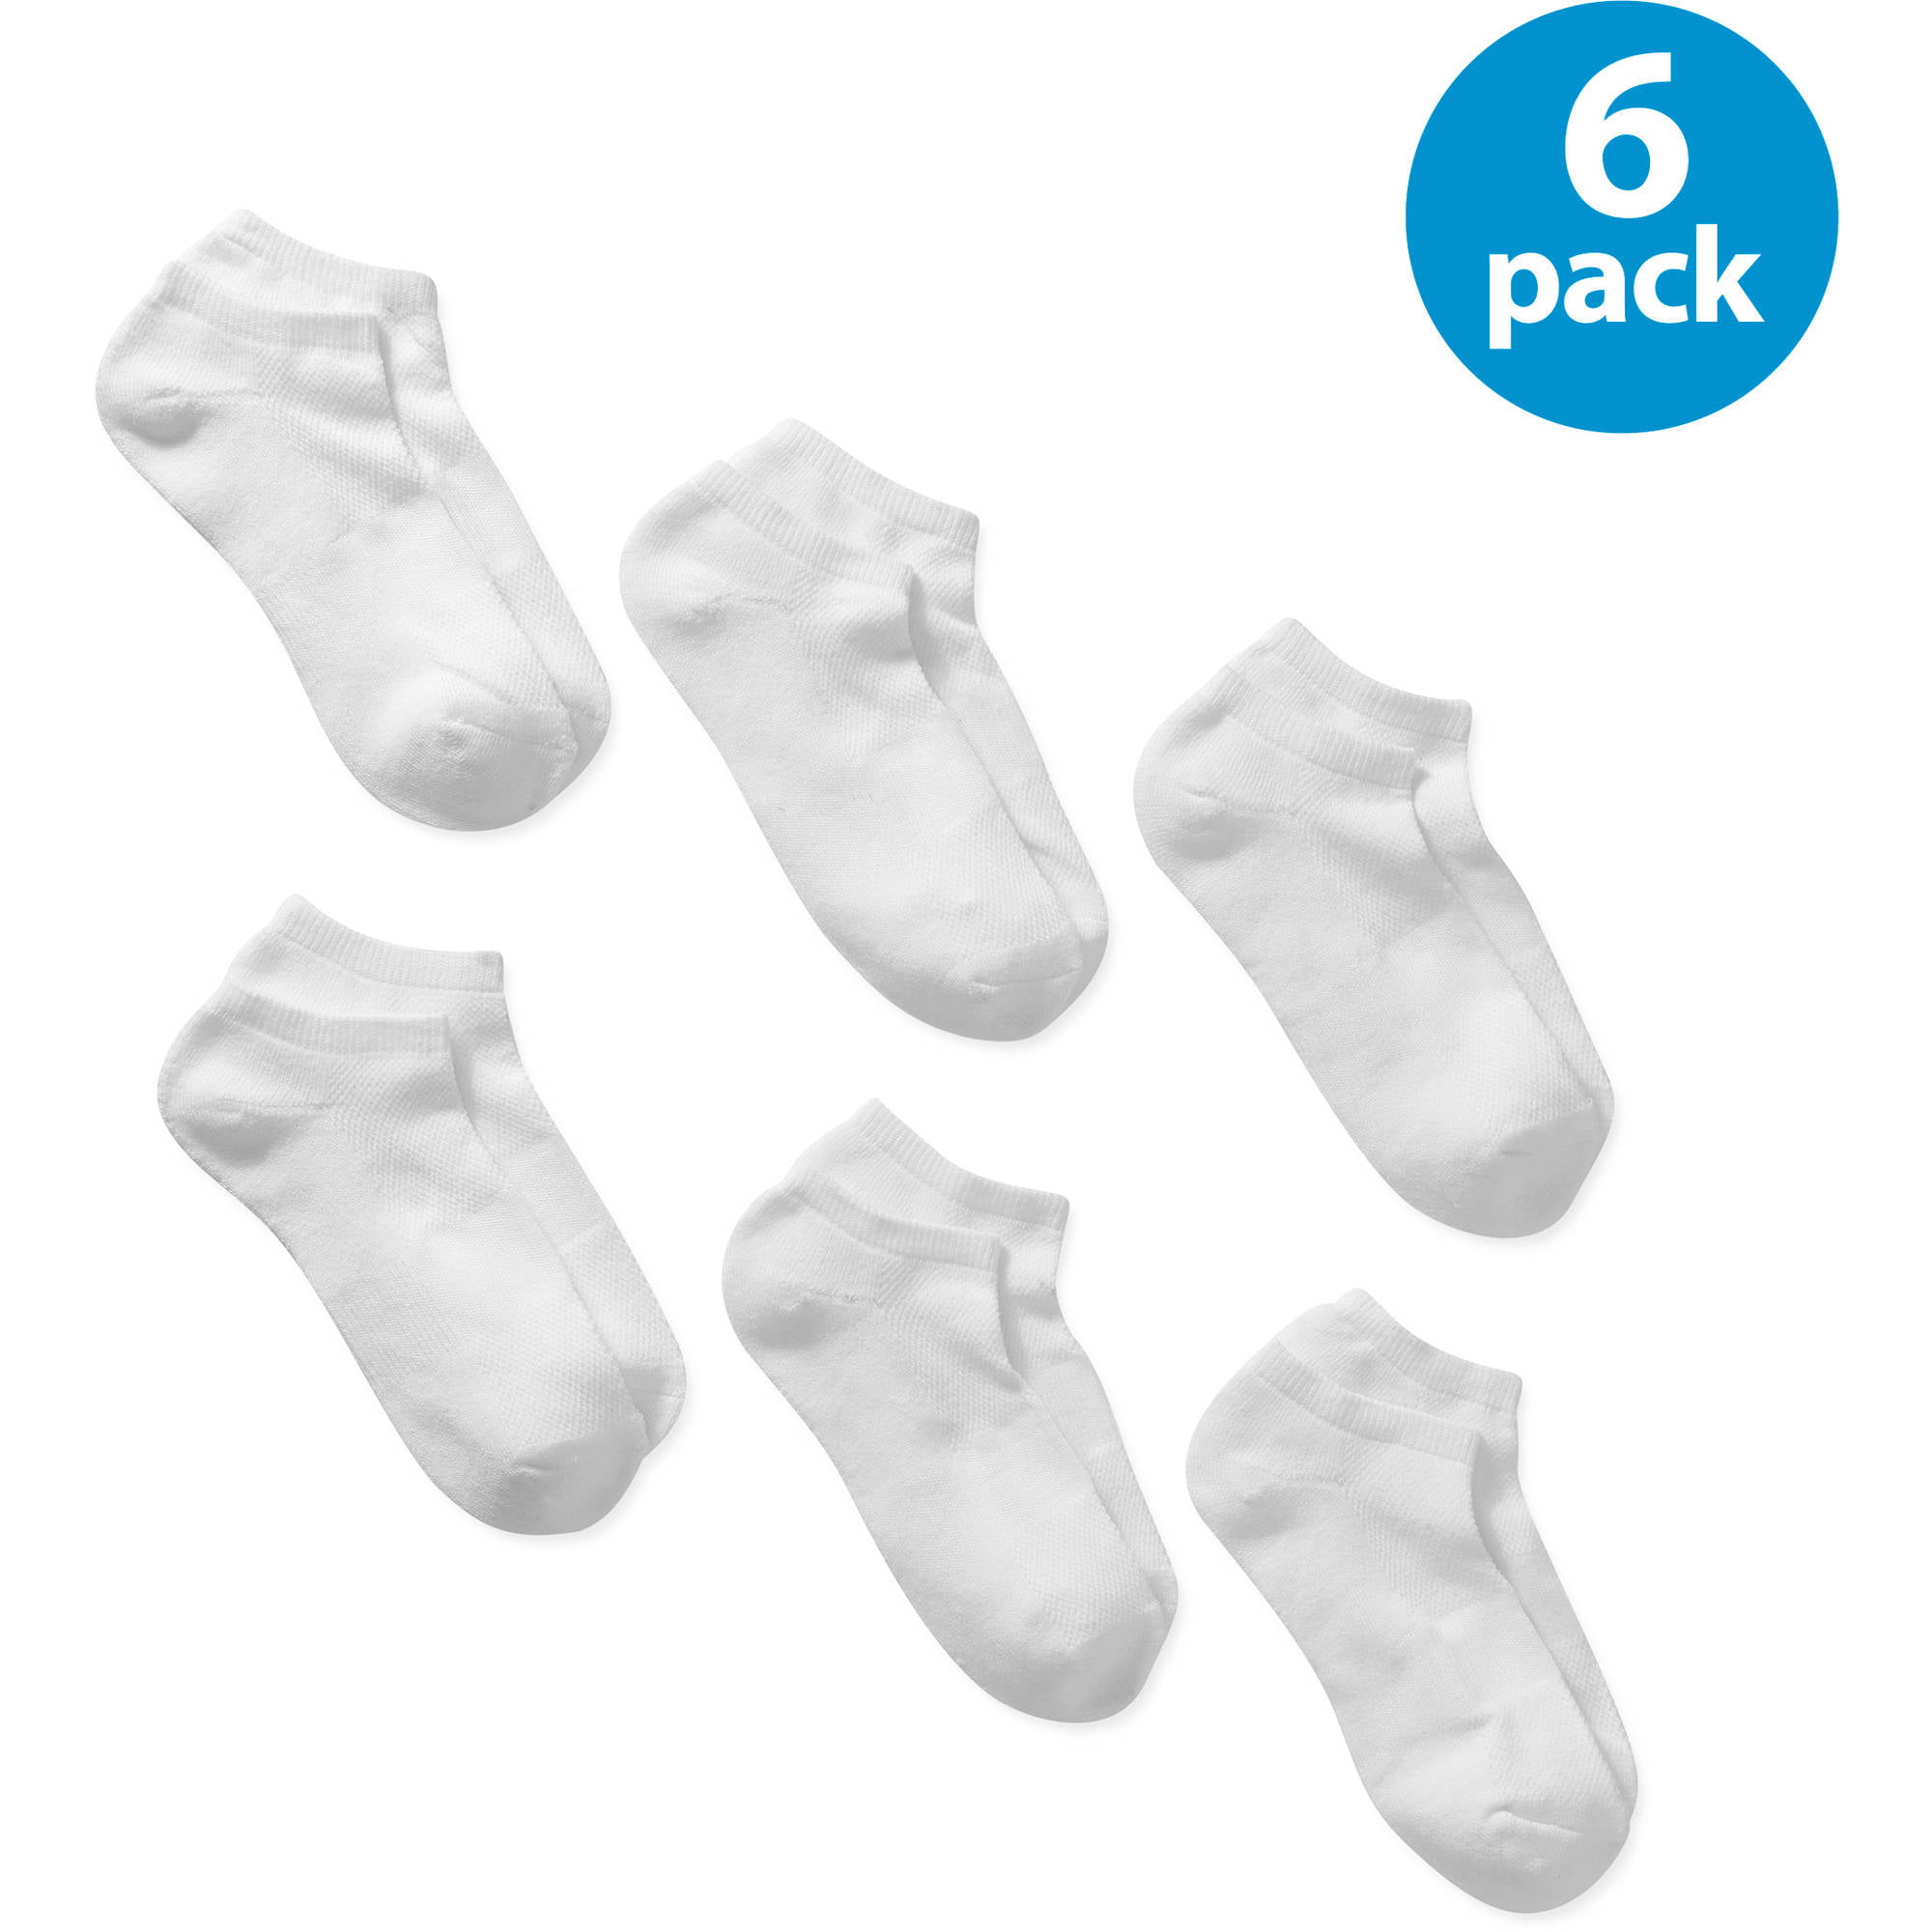 Assorted Mid-Cushion No Show with Arch Support & Mesh Ventilation 10 Pack